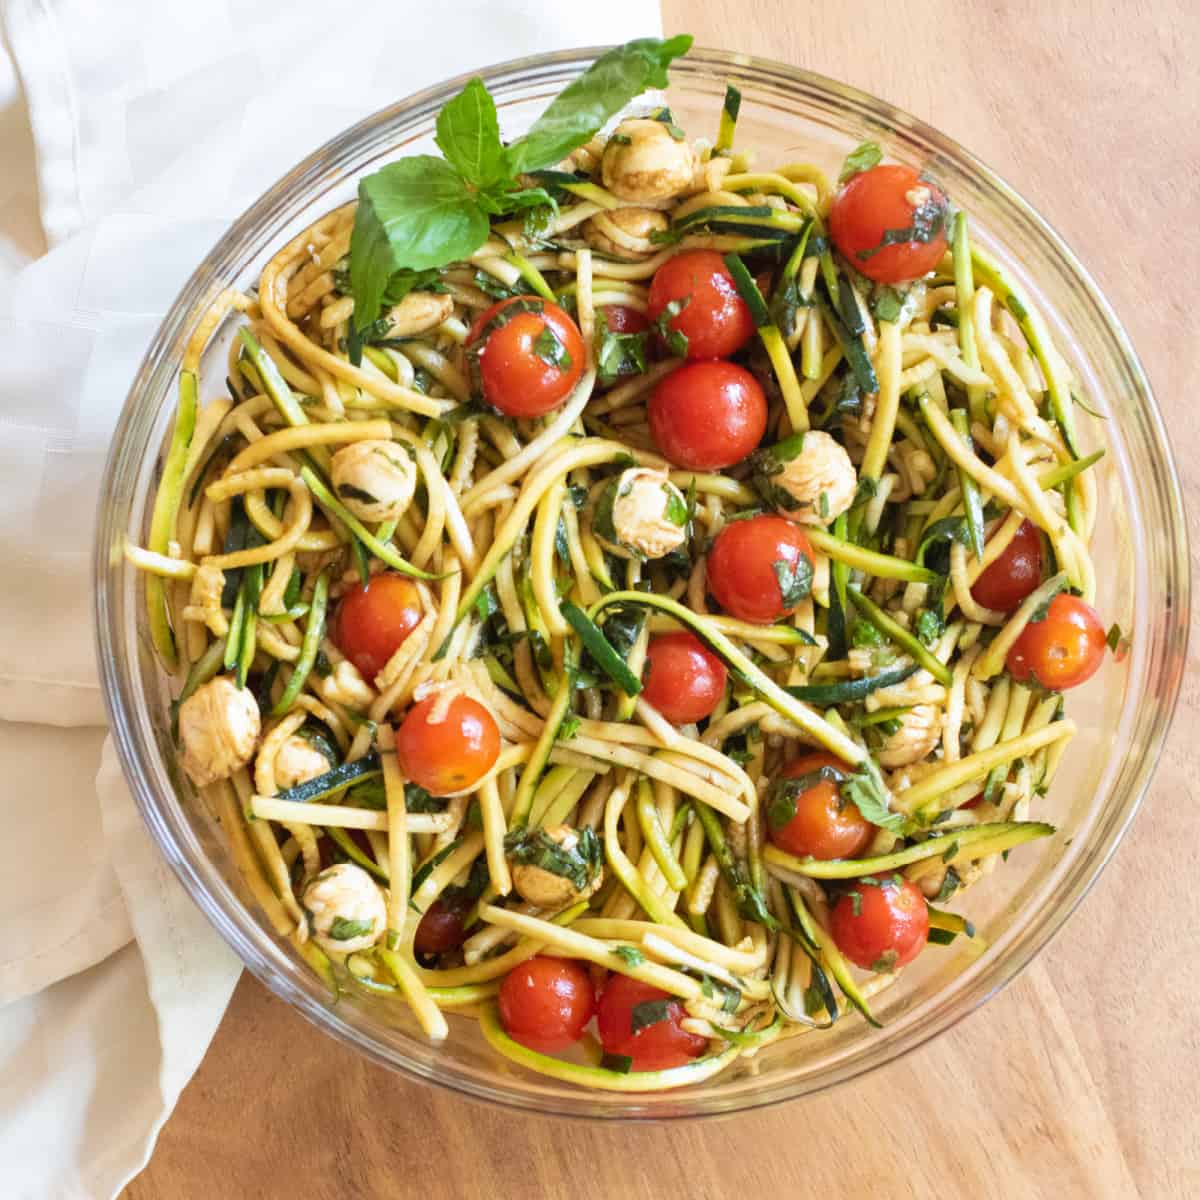 a bowl of zucchini noodles, cherry tomatoes and mozzarella balls with a balsamic dressing.